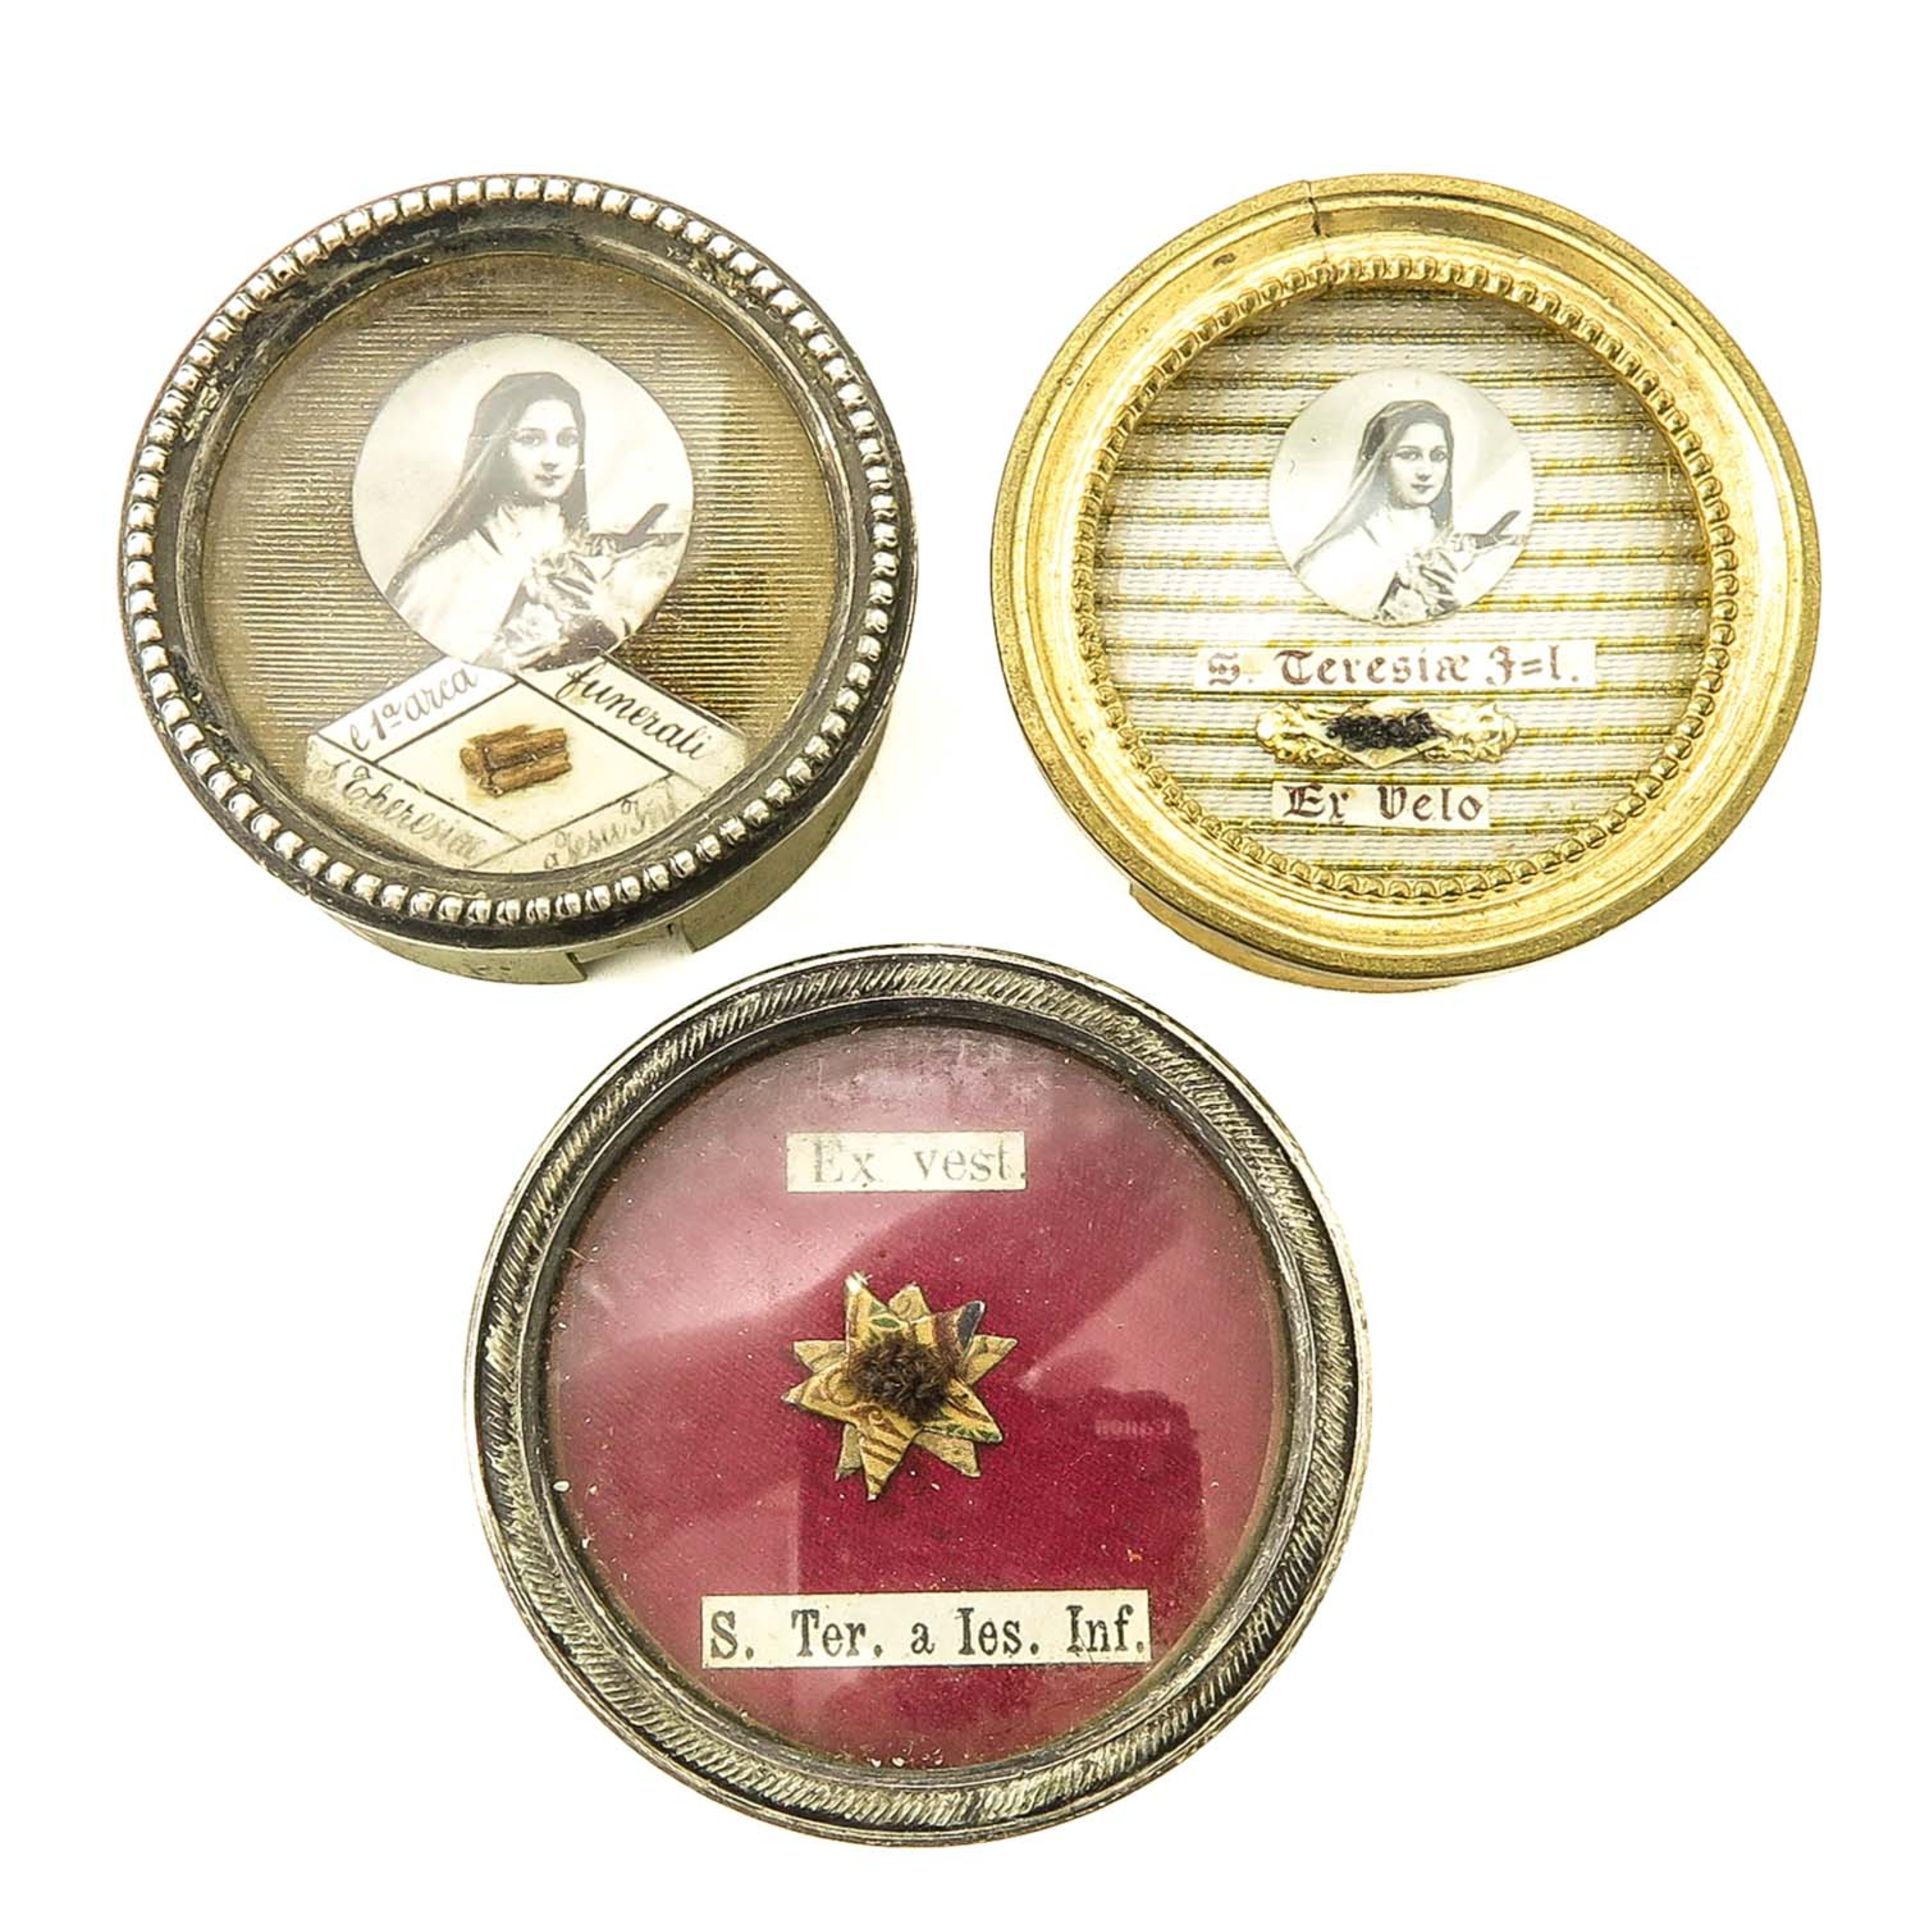 A Collection of 3 Relics from Saint Theresa